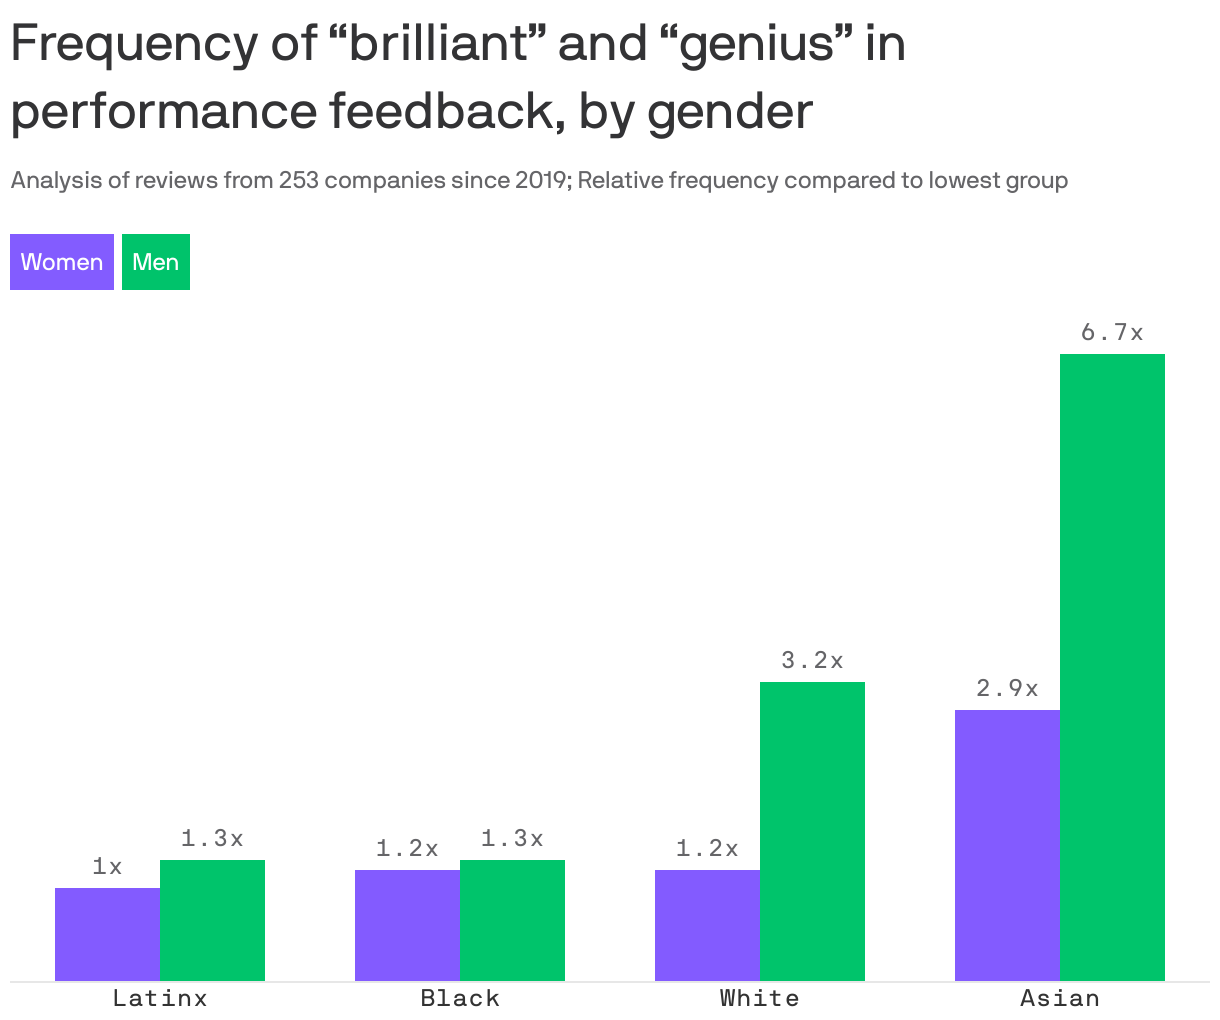 Frequency of “brilliant” and “genius” in performance feedback, by gender